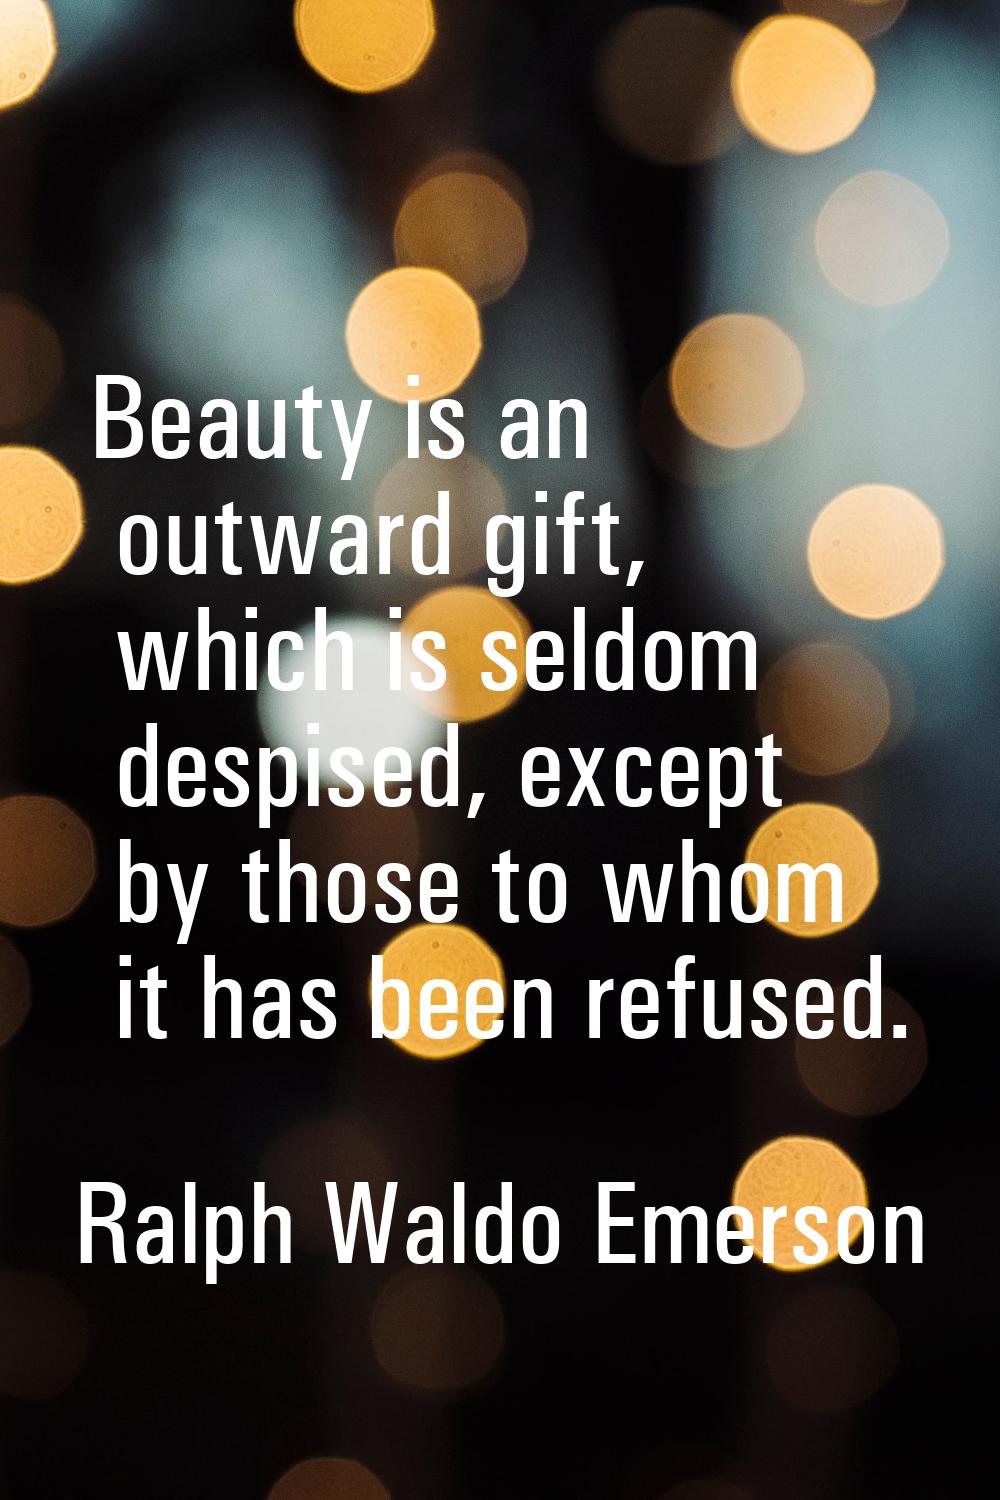 Beauty is an outward gift, which is seldom despised, except by those to whom it has been refused.